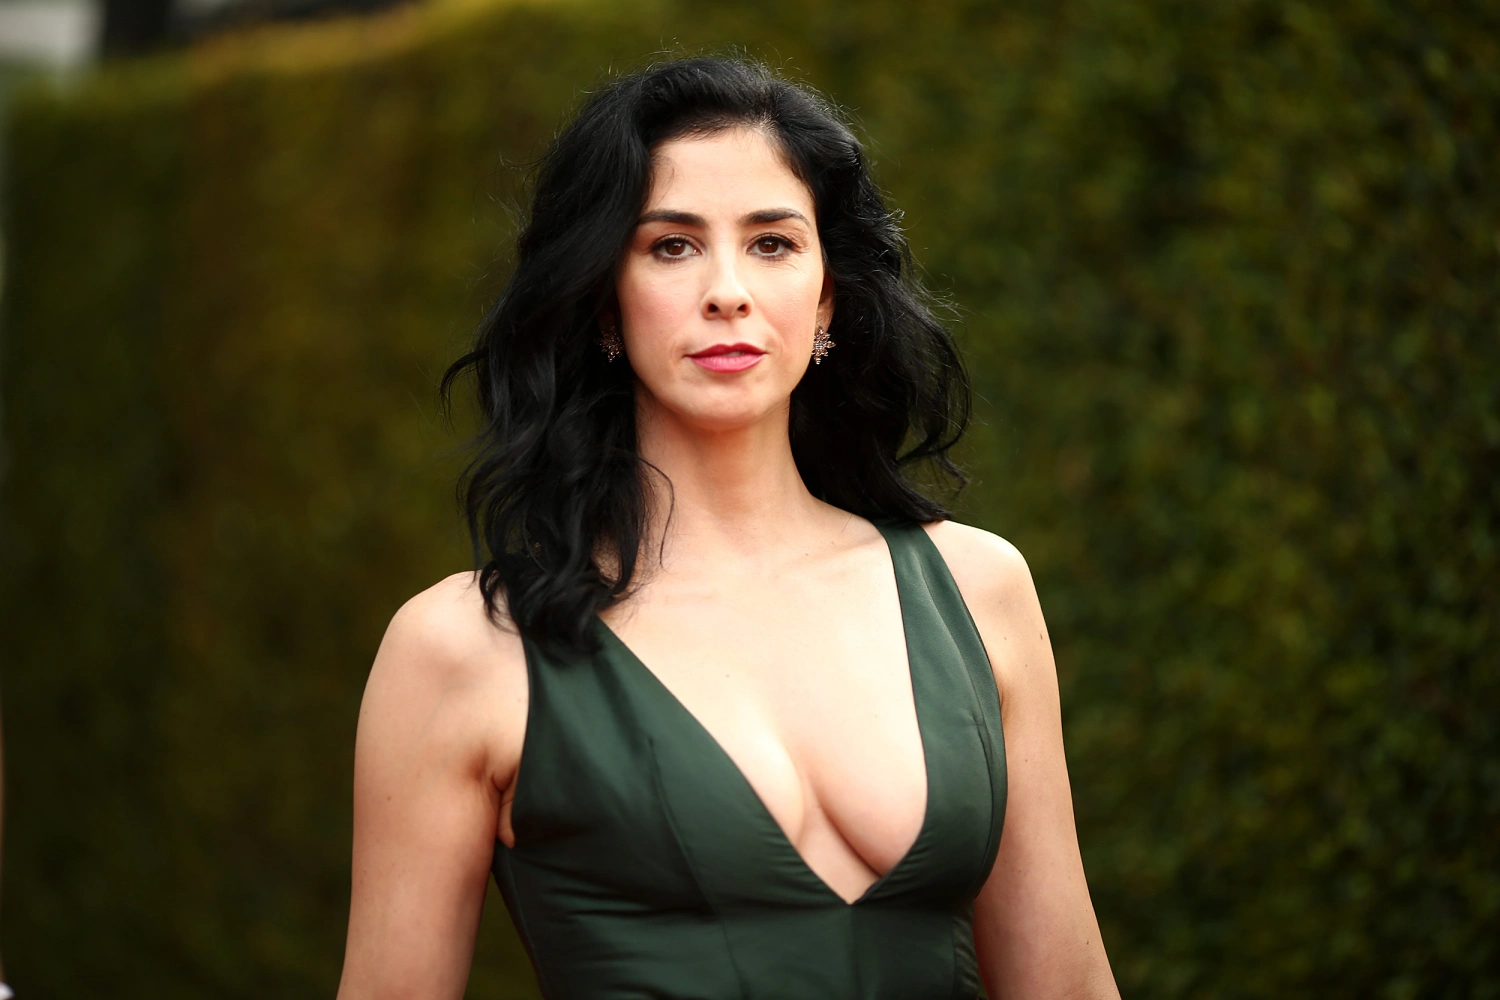 How rich is Sarah Silverman?